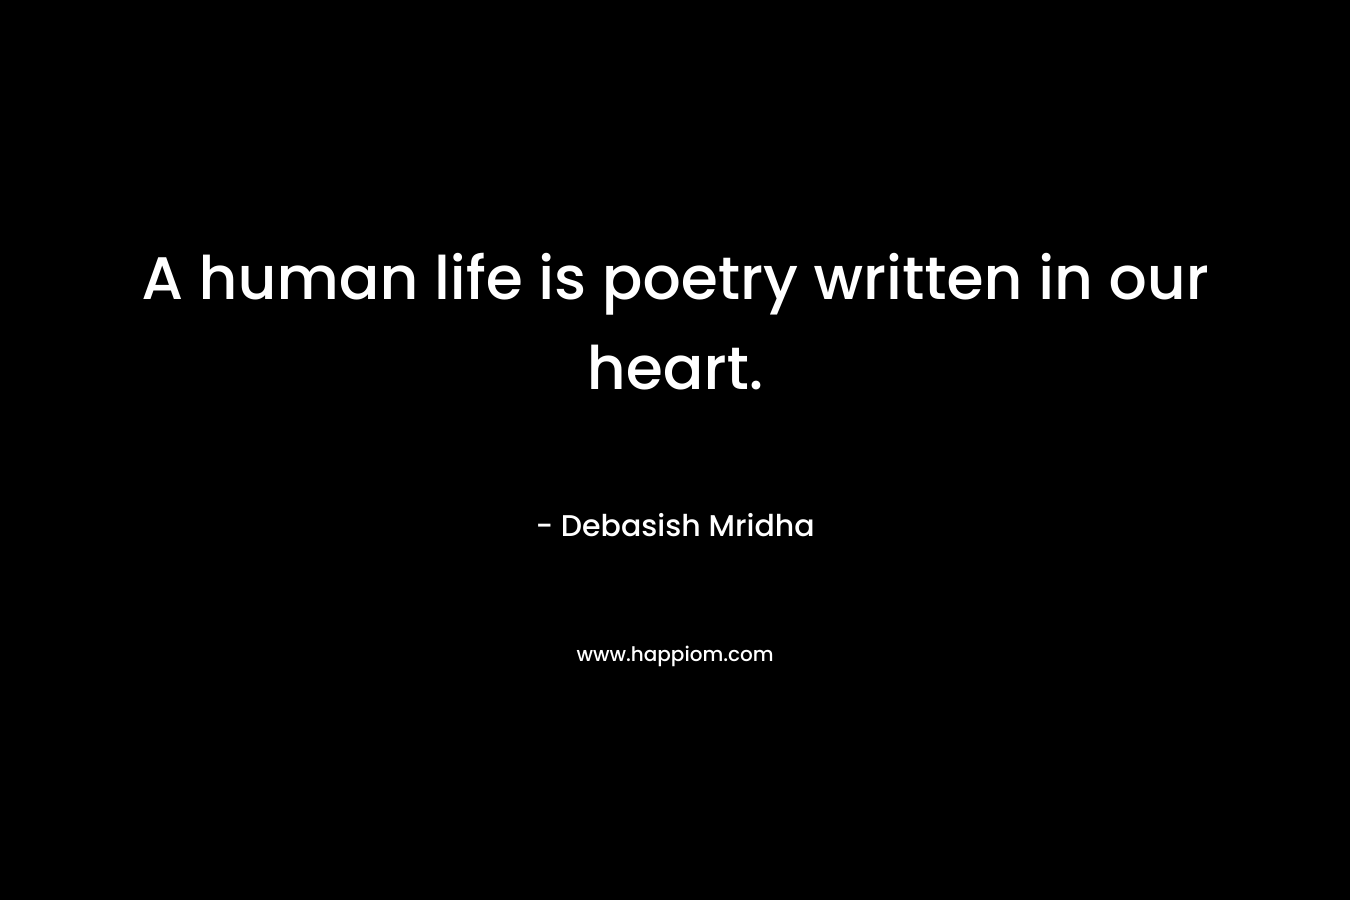 A human life is poetry written in our heart.